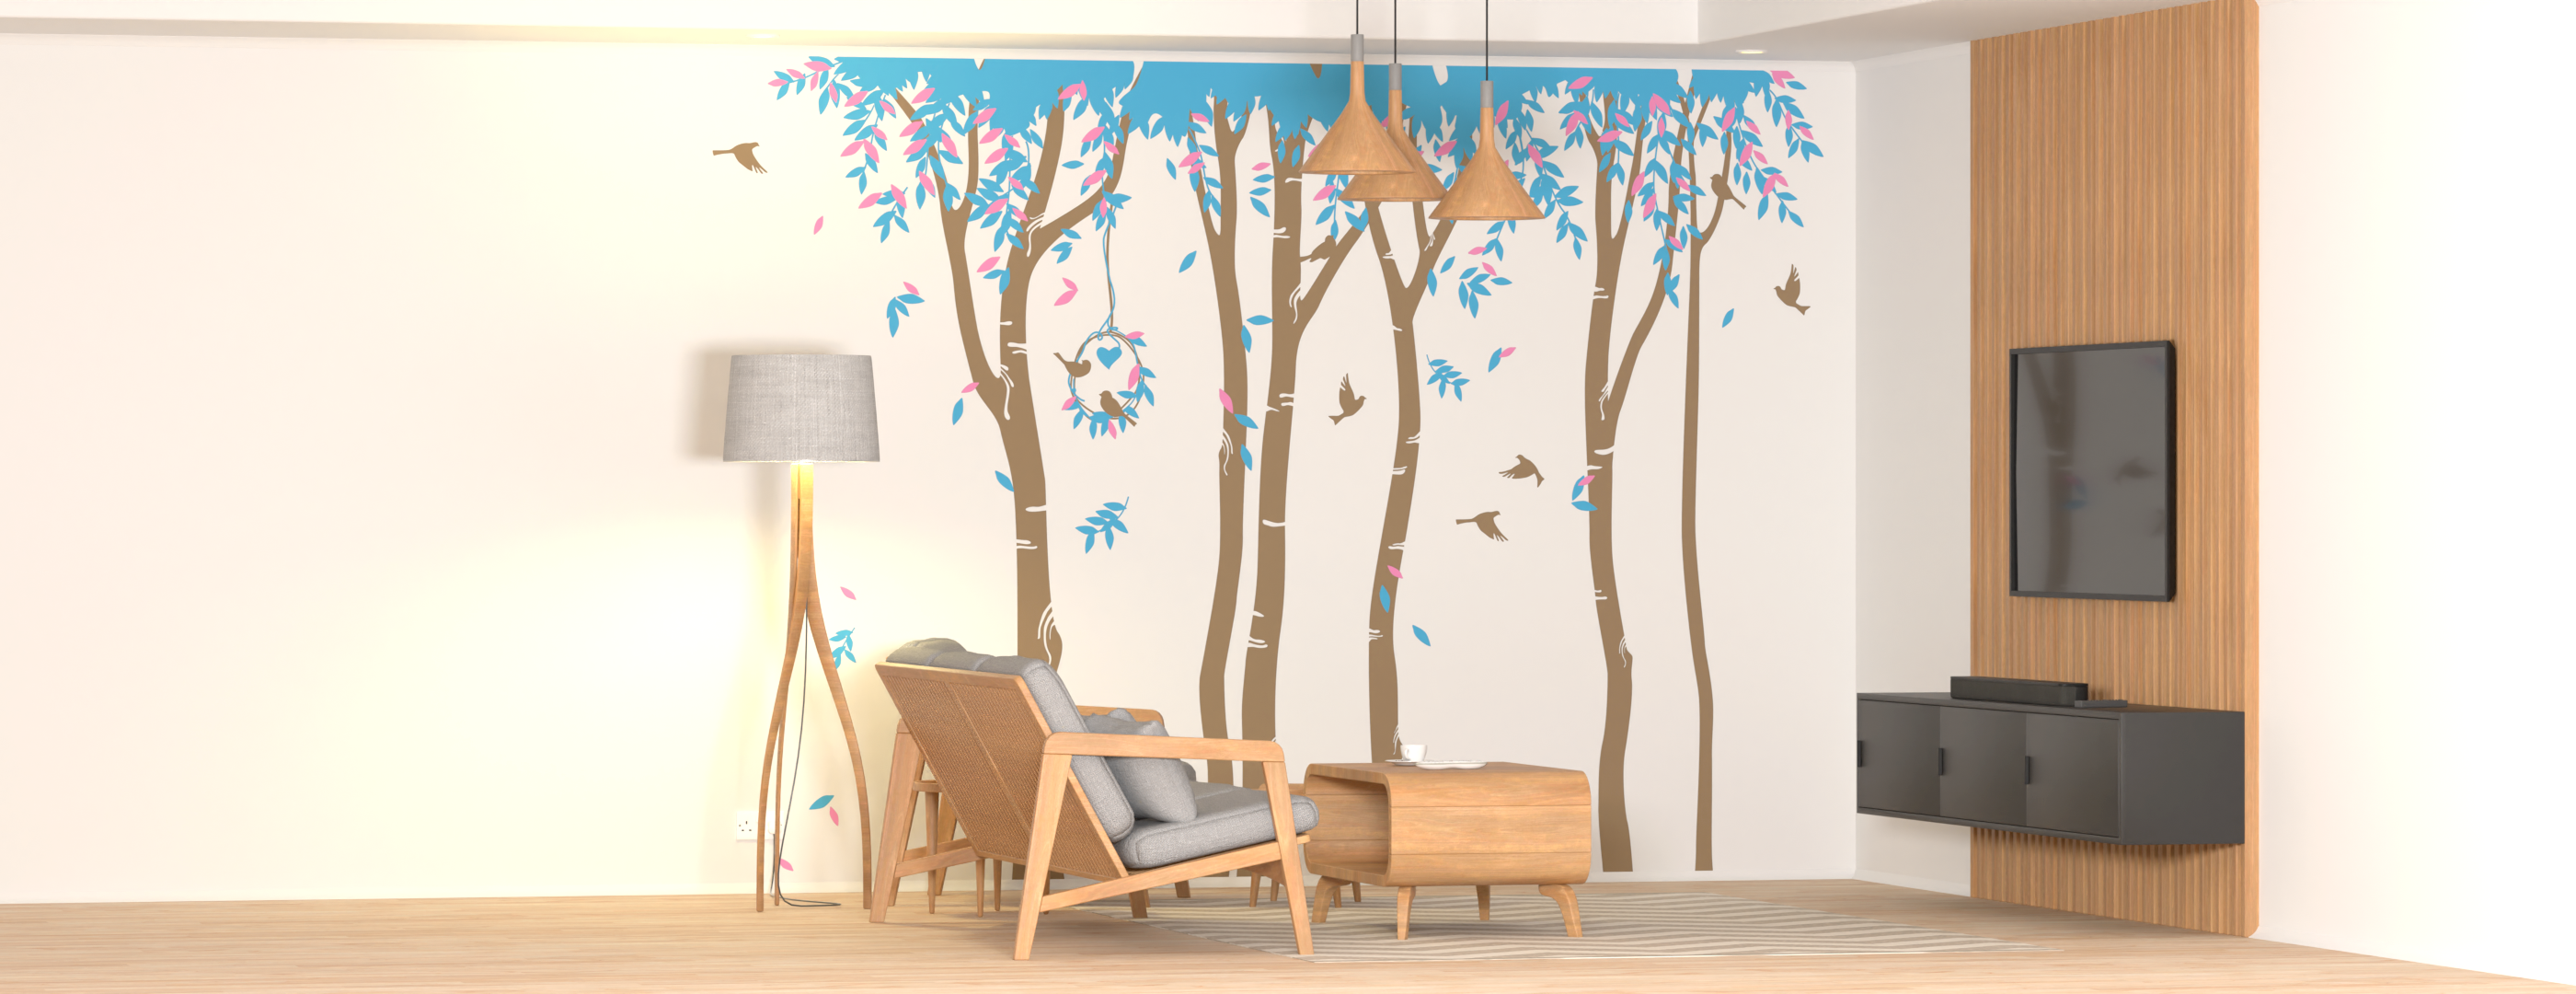 A modern styled living room with a large tree wall sticker in the background and decor